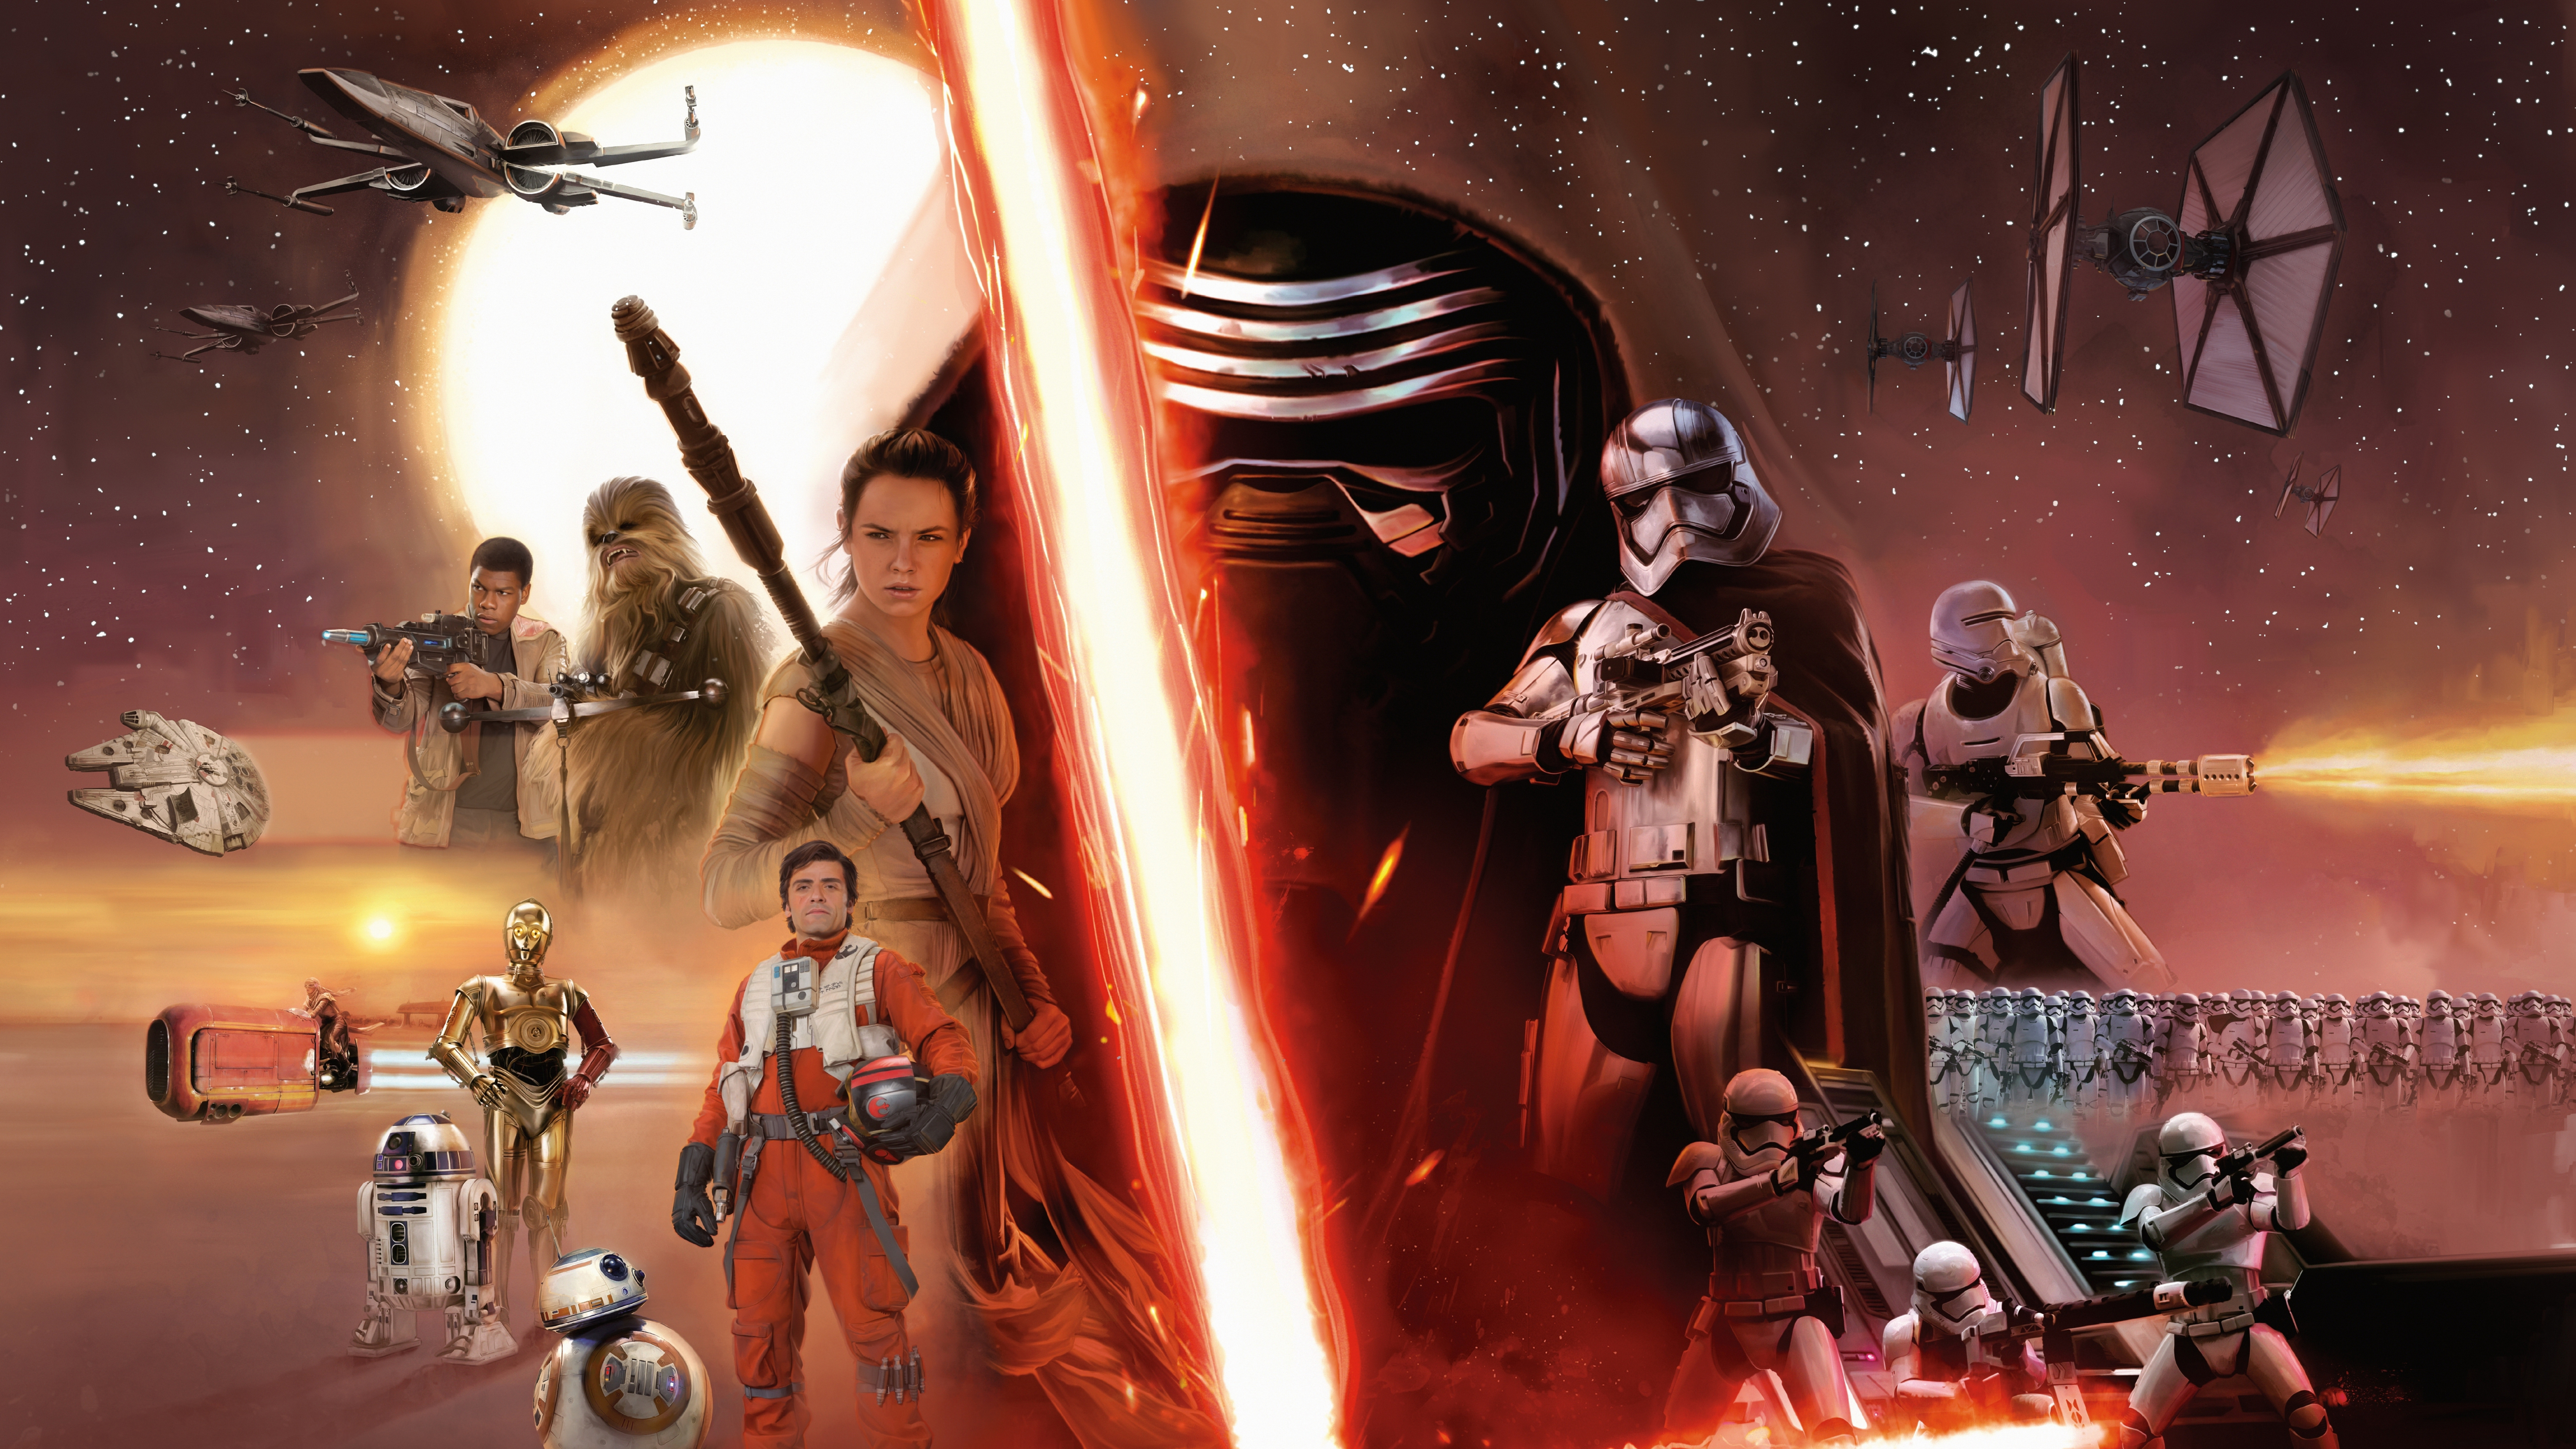 Star Wars The Force Awakens, Star Wars, Action Figure, Lucasfilm, Space. Wallpaper in 7680x4320 Resolution